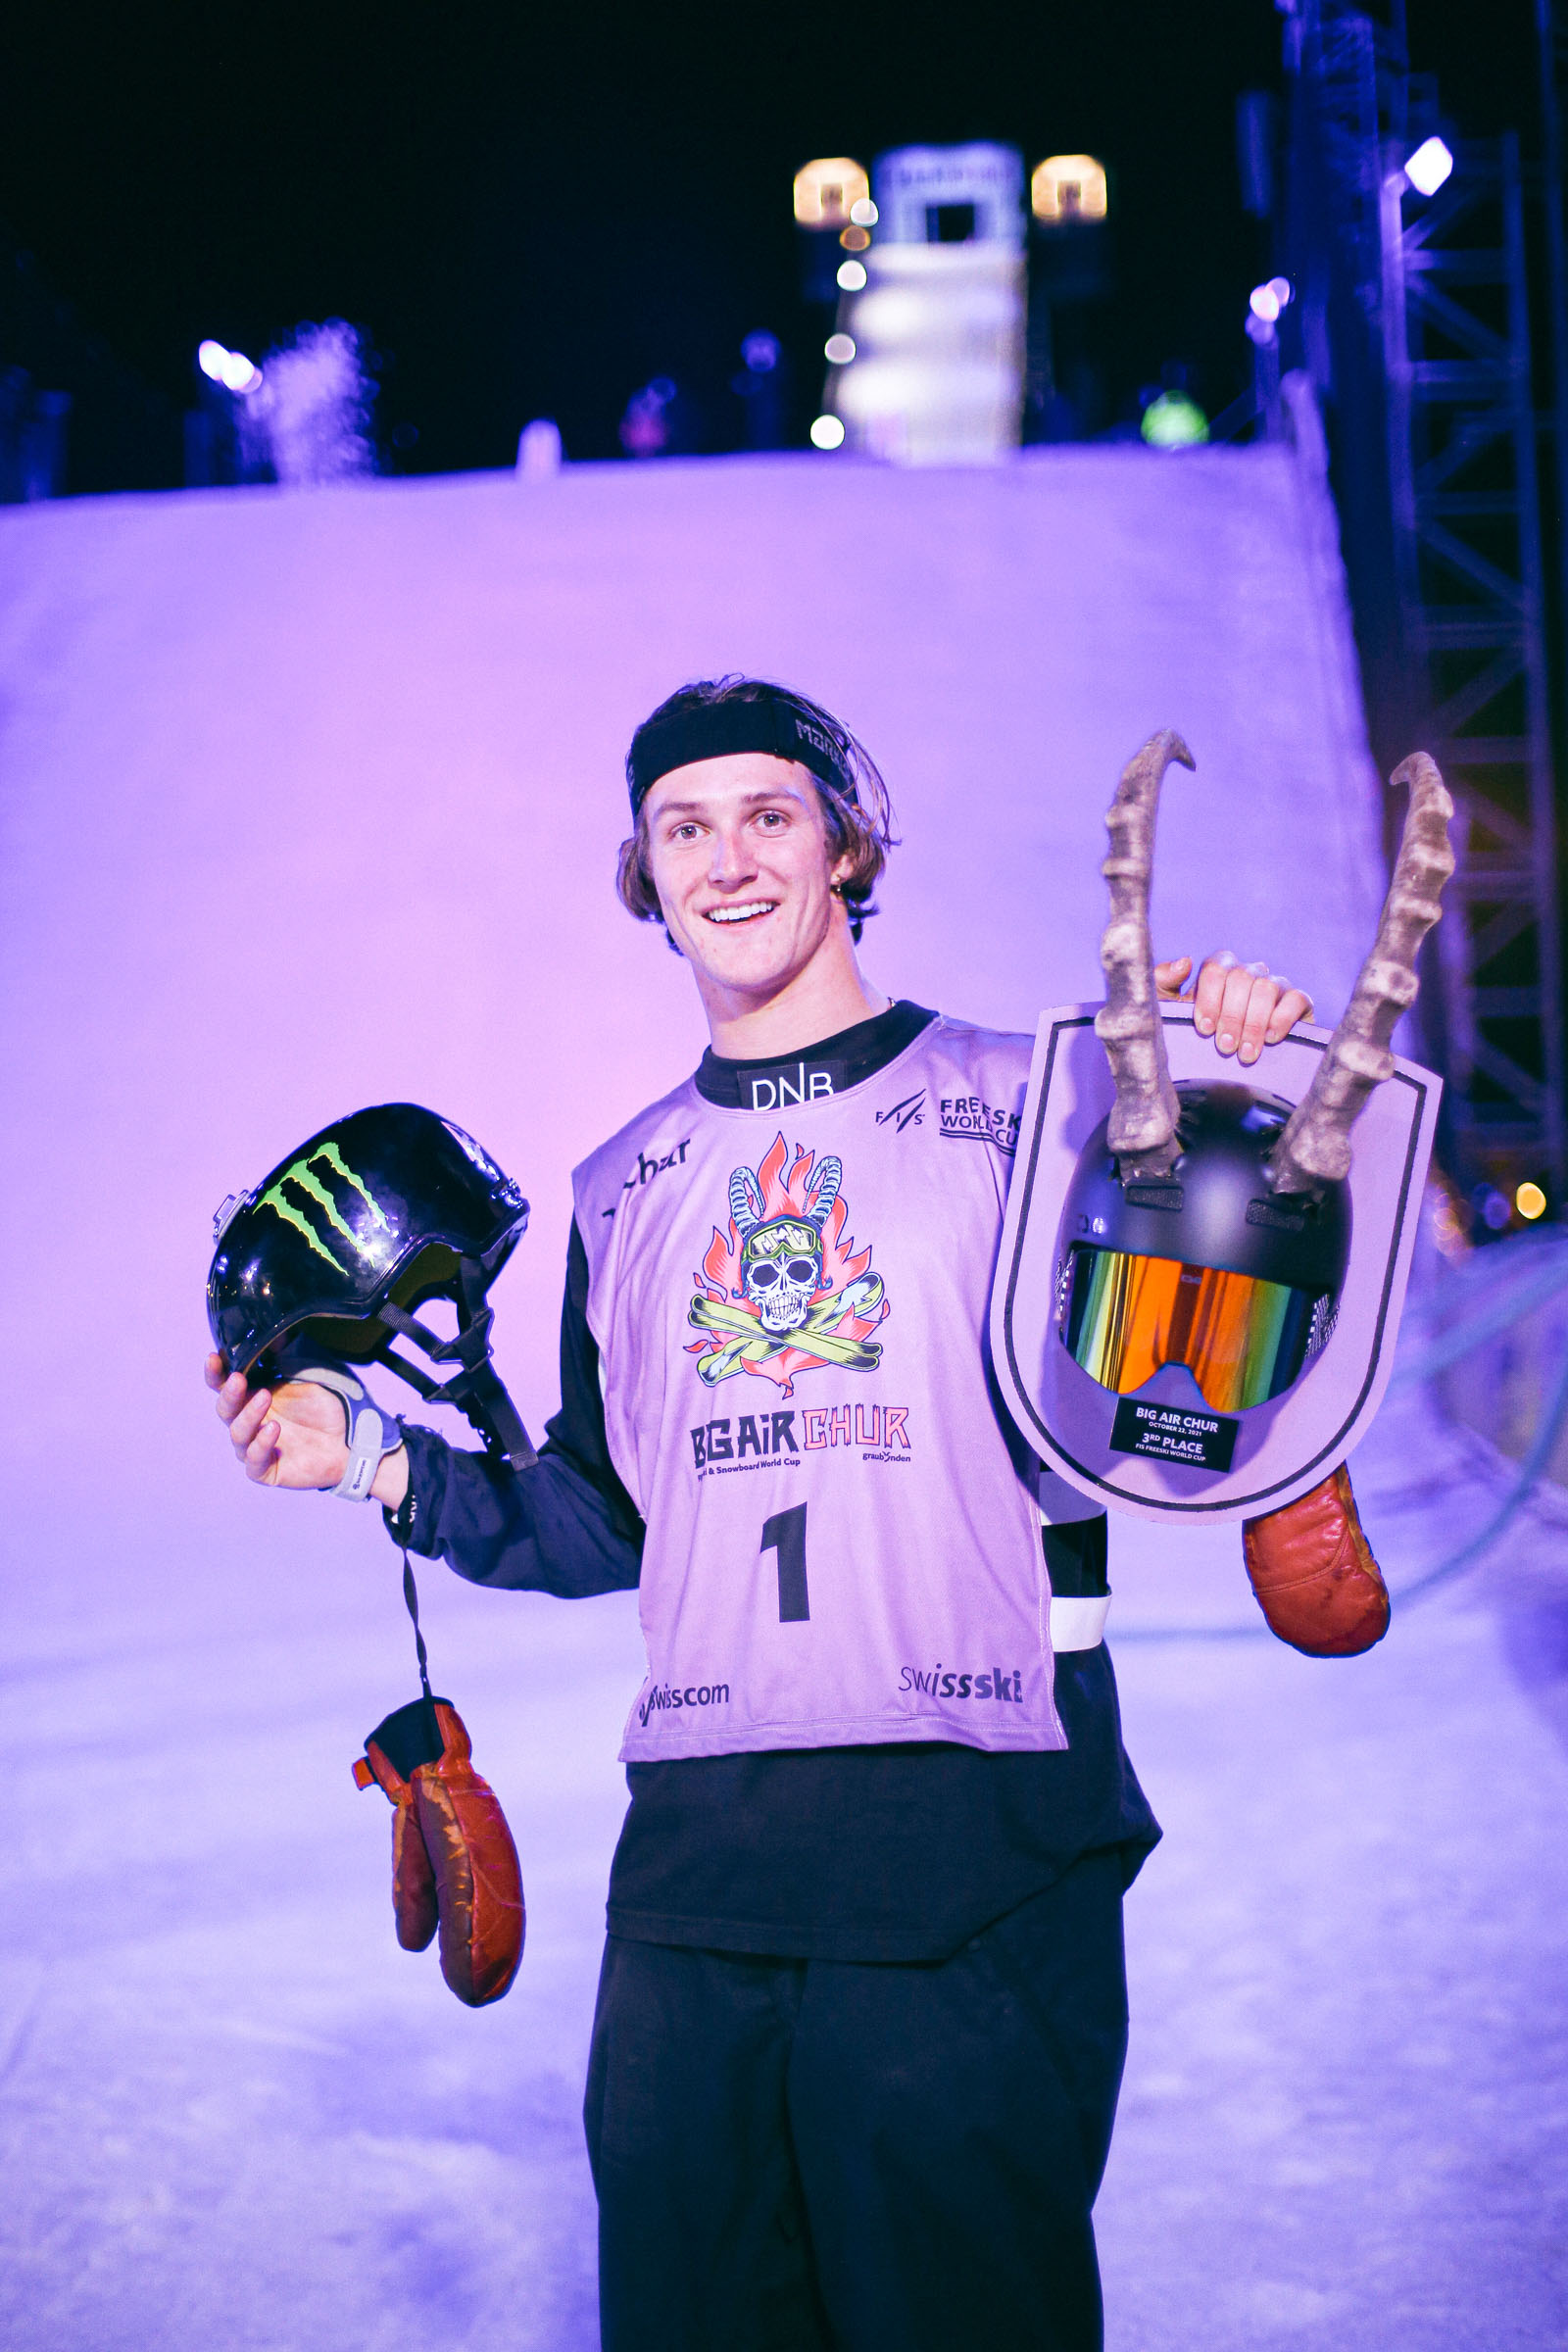 Monster Energy's Birk Rudd Earns 3rd Place in Men's Freeski Big Air at FIS Freeski and Snowboard 2021/2022 World Cup Season Opener in Chur